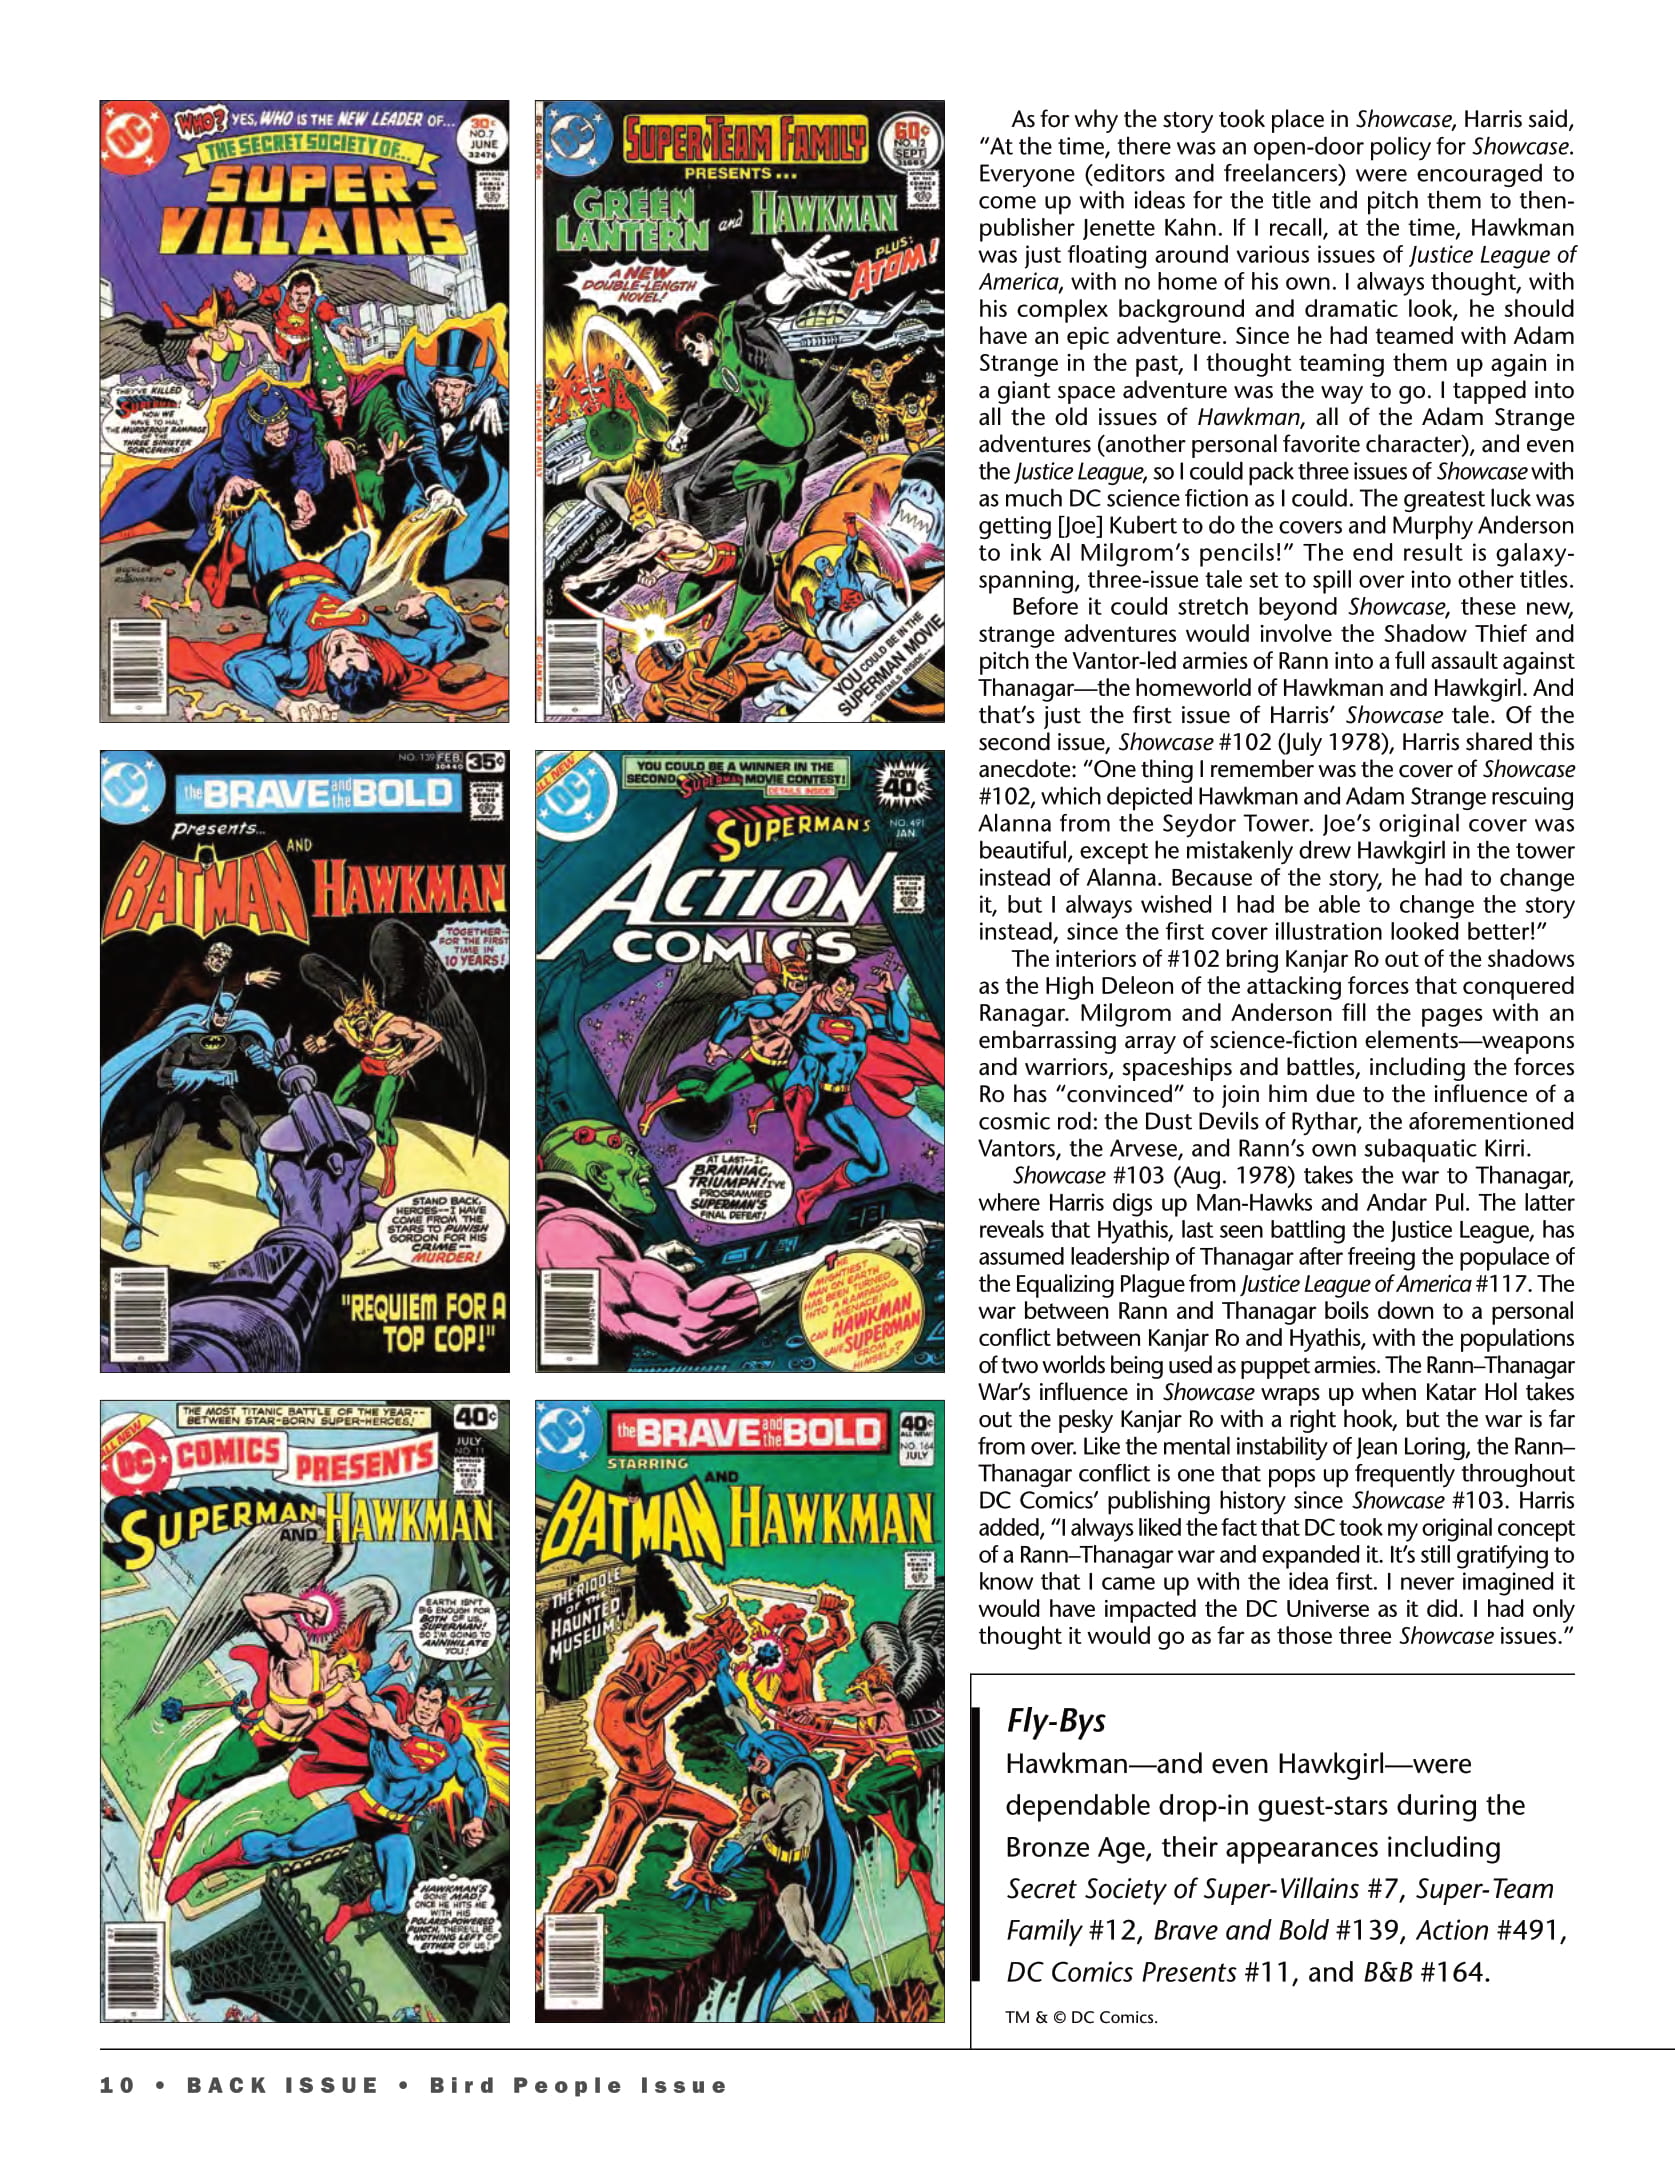 Read online Back Issue comic -  Issue #97 - 12